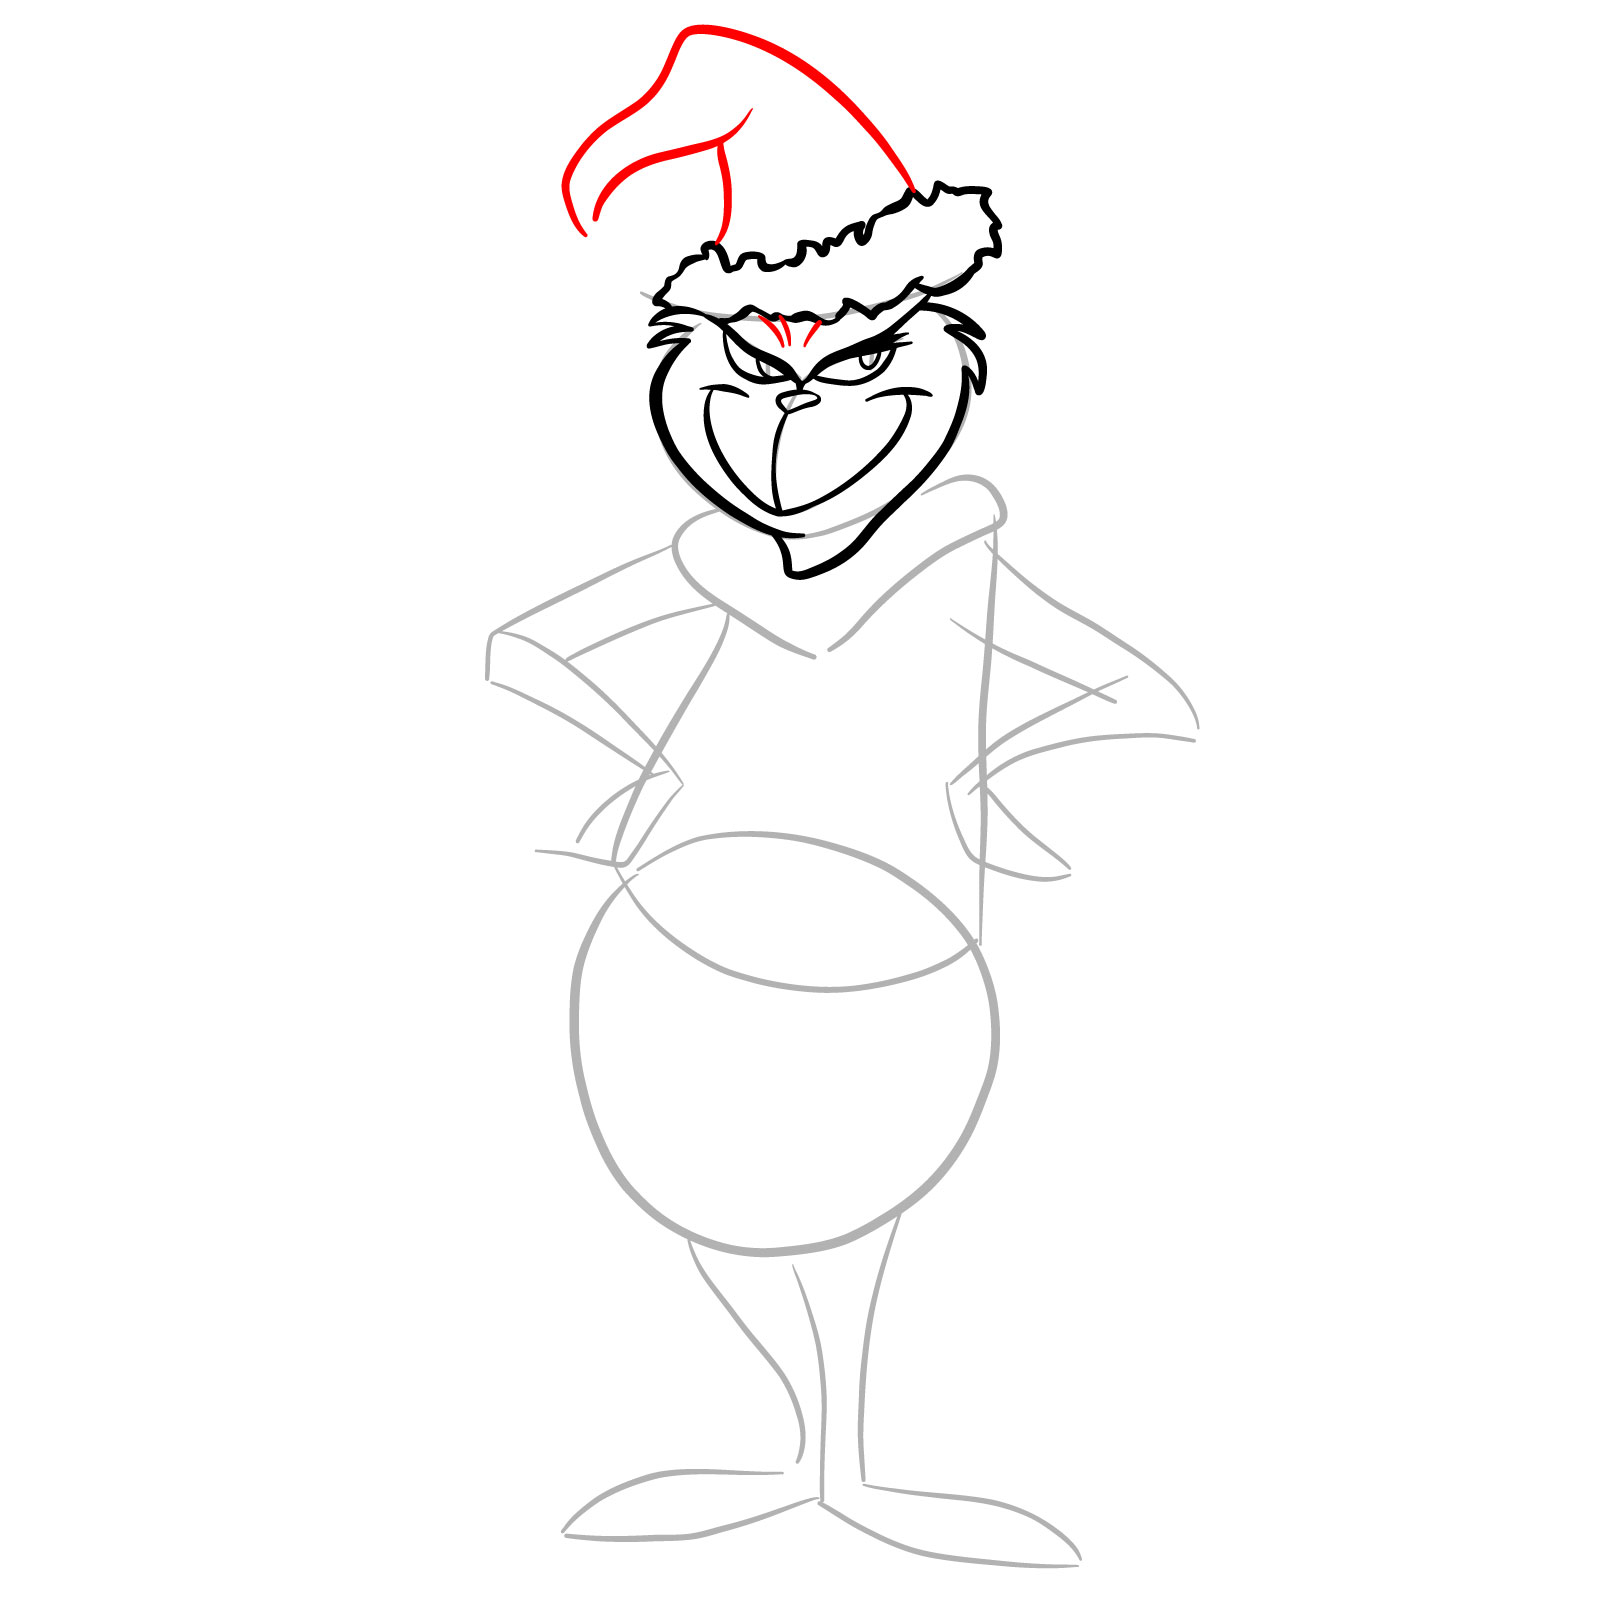 How to draw The Grinch in a Christmas costume - step 10